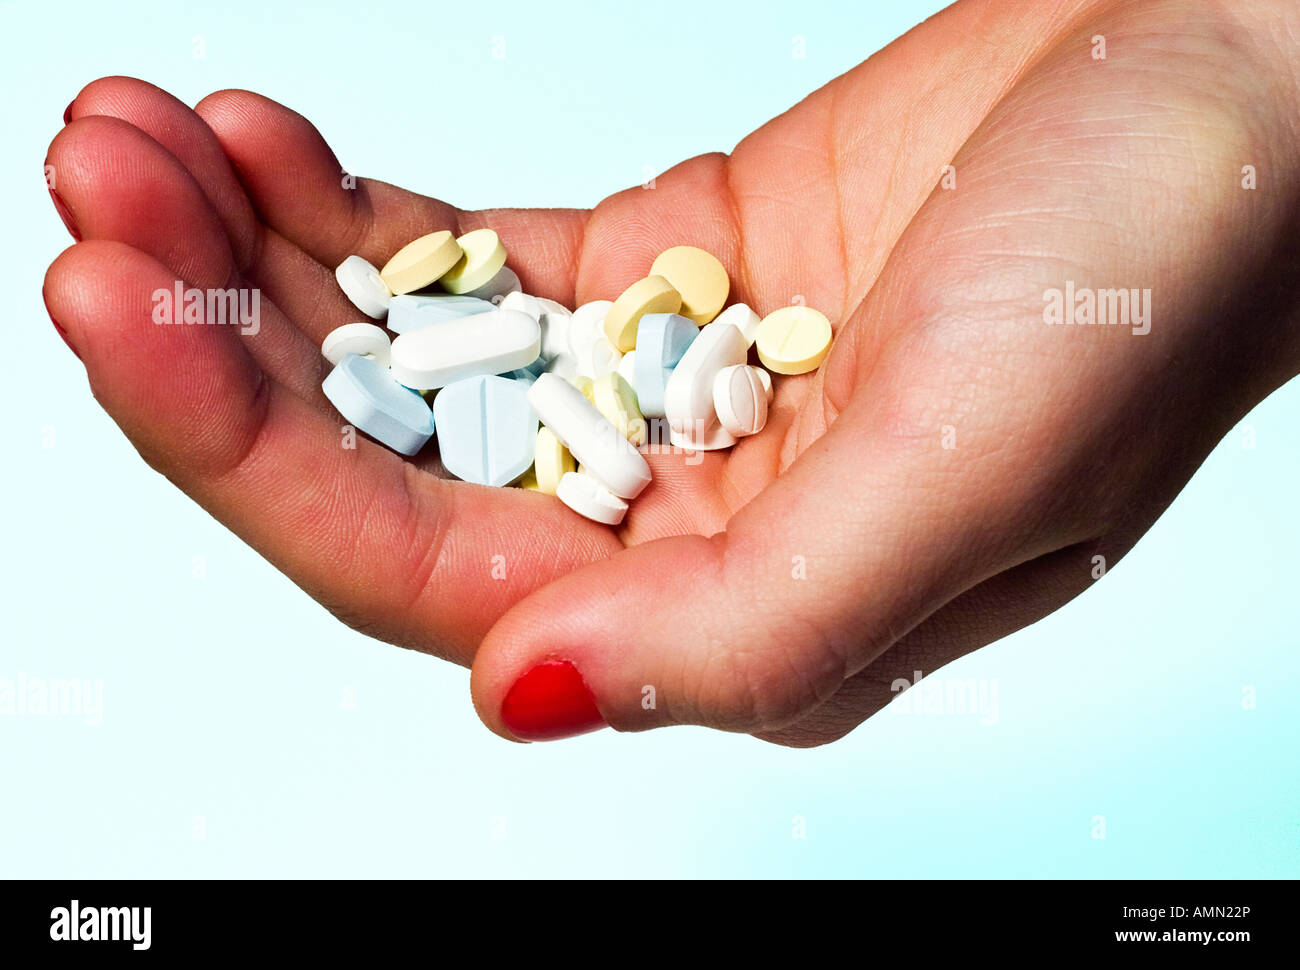 Hand Holding Pills (trademarks and logos removed) Stock Photo